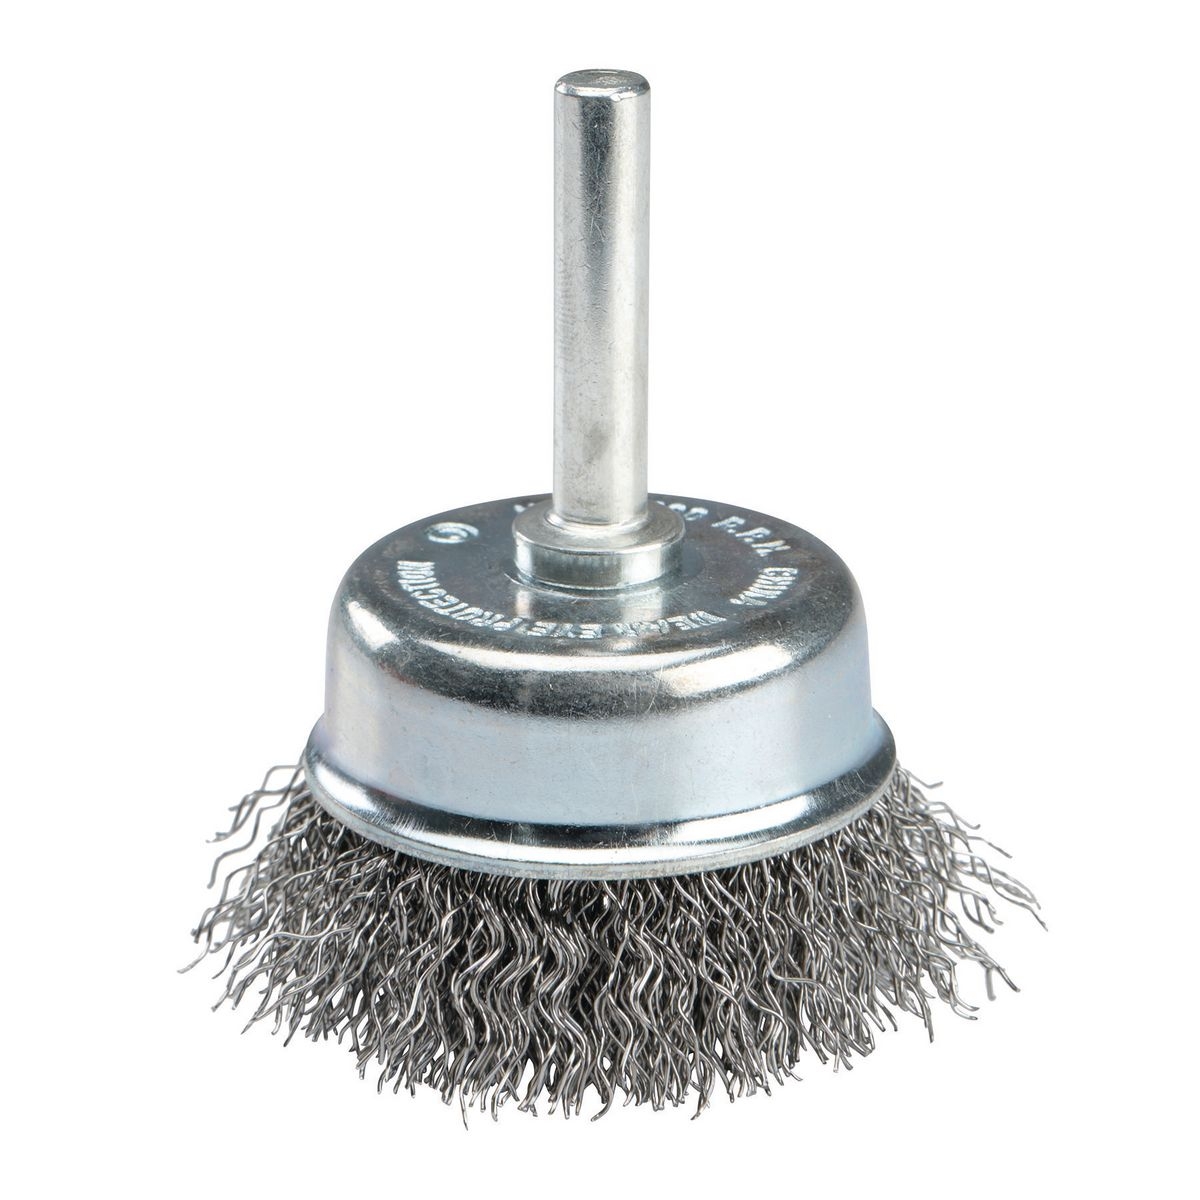 WARRIOR 2 in. Wire Cup Brush with 1/4 in. Shank – Item 42858 / 60480